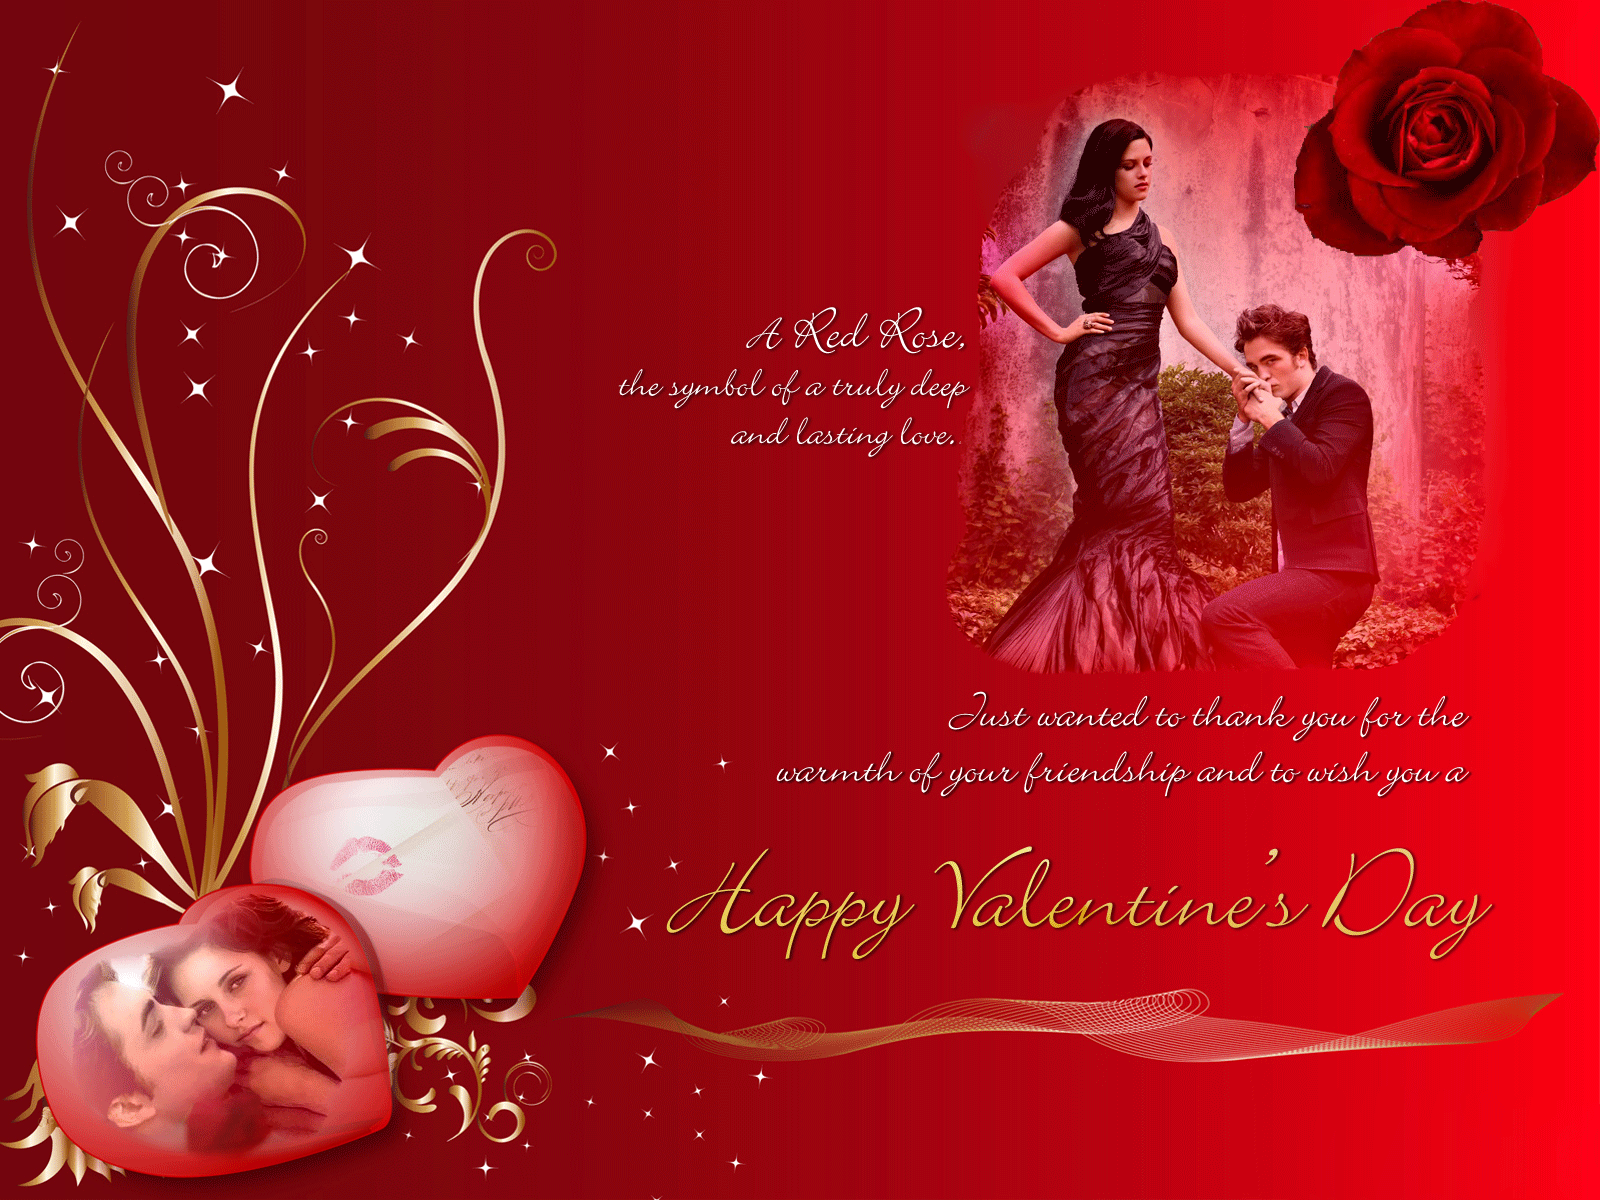 Valentine Day Image and Quotes 2019. Download Valentine'S